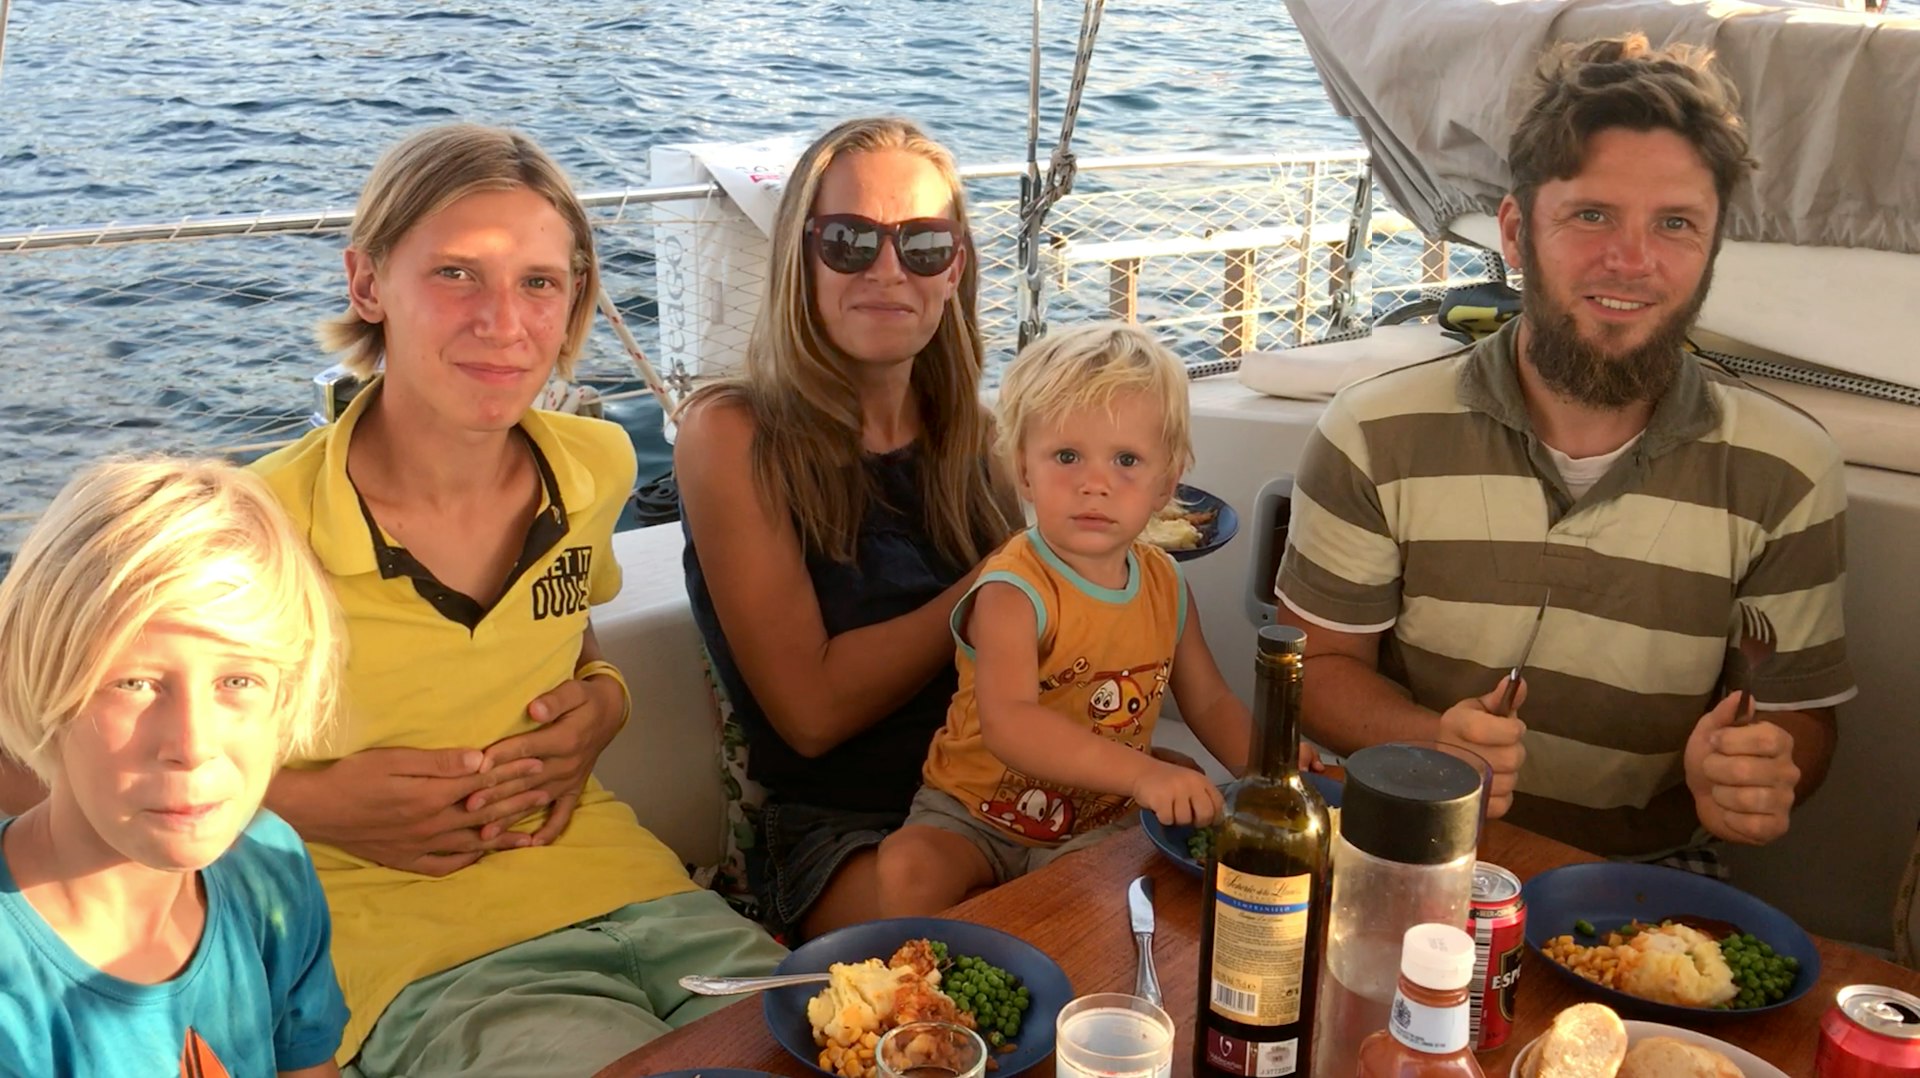 A family of two adults and three children sit eating a meal on the deck of their sailing yacht